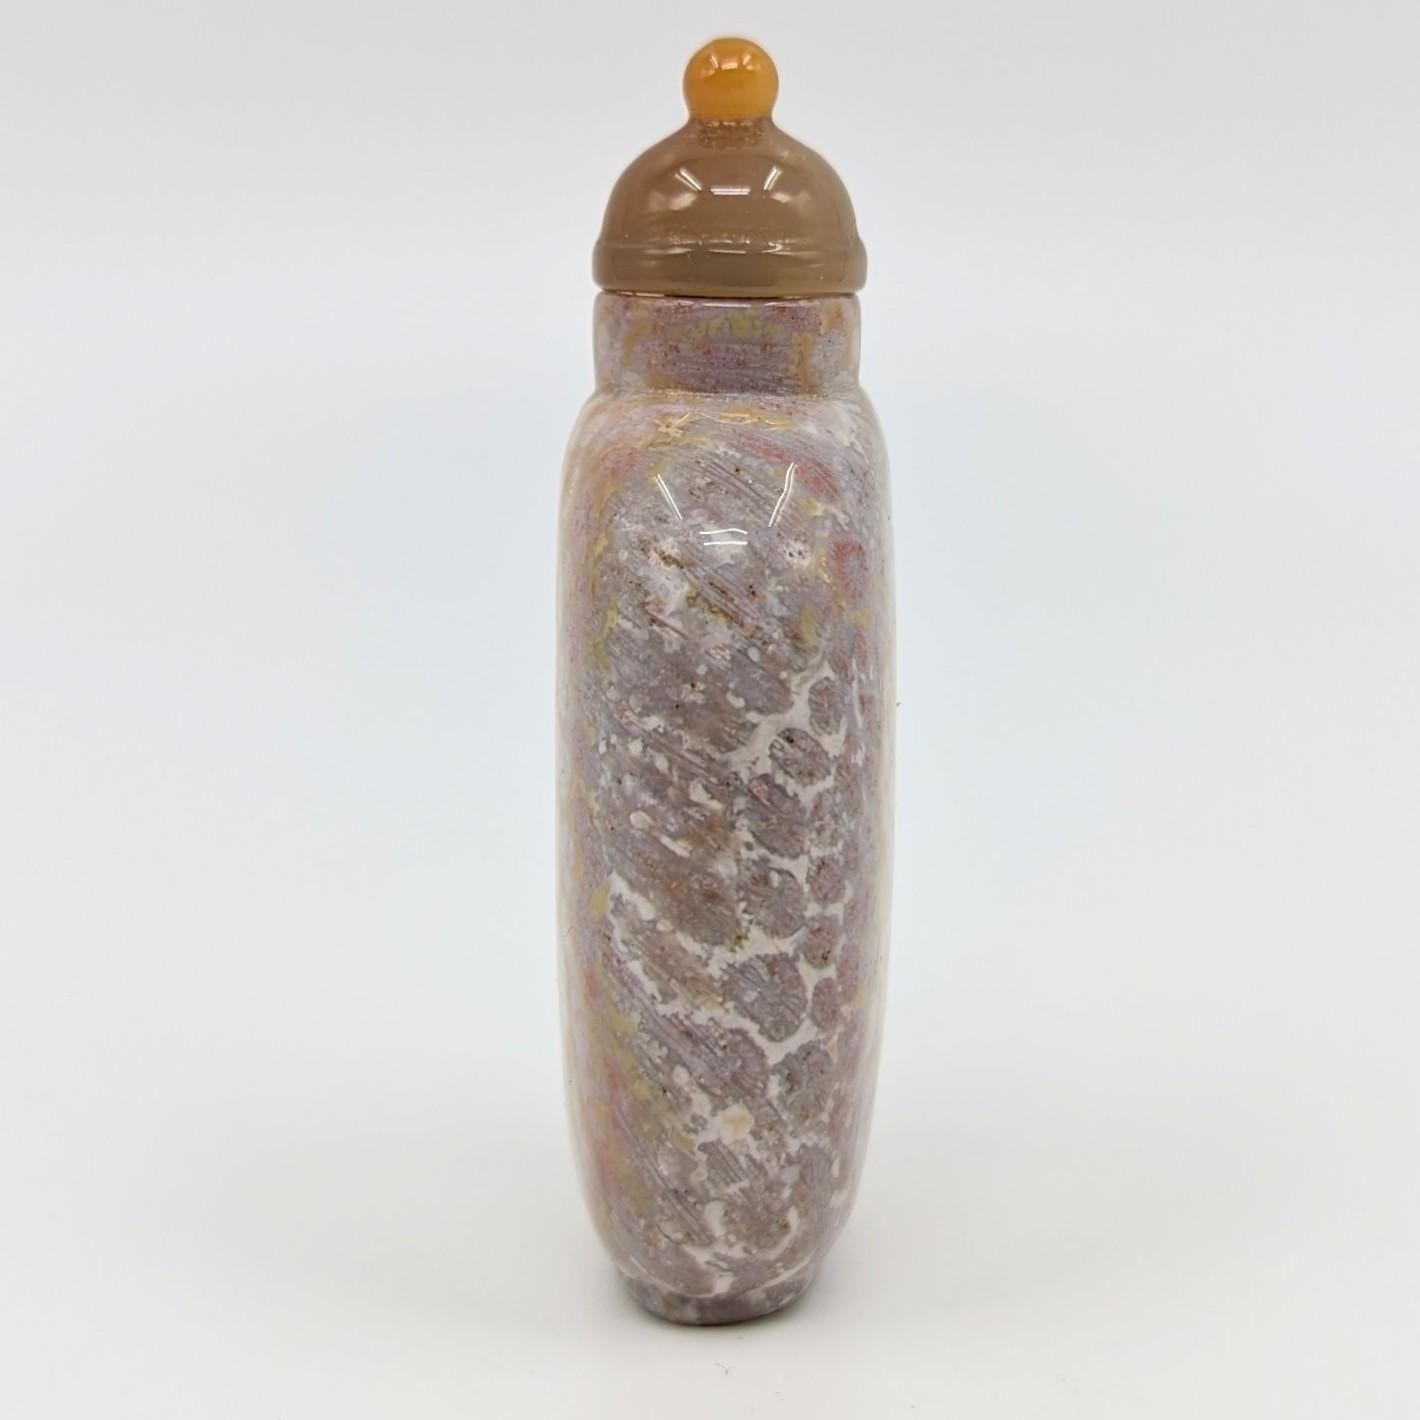 Women's or Men's Antique Chinese Fossil Hardstone Snuff Bottle with Carved Agate Stopper 19c Qing